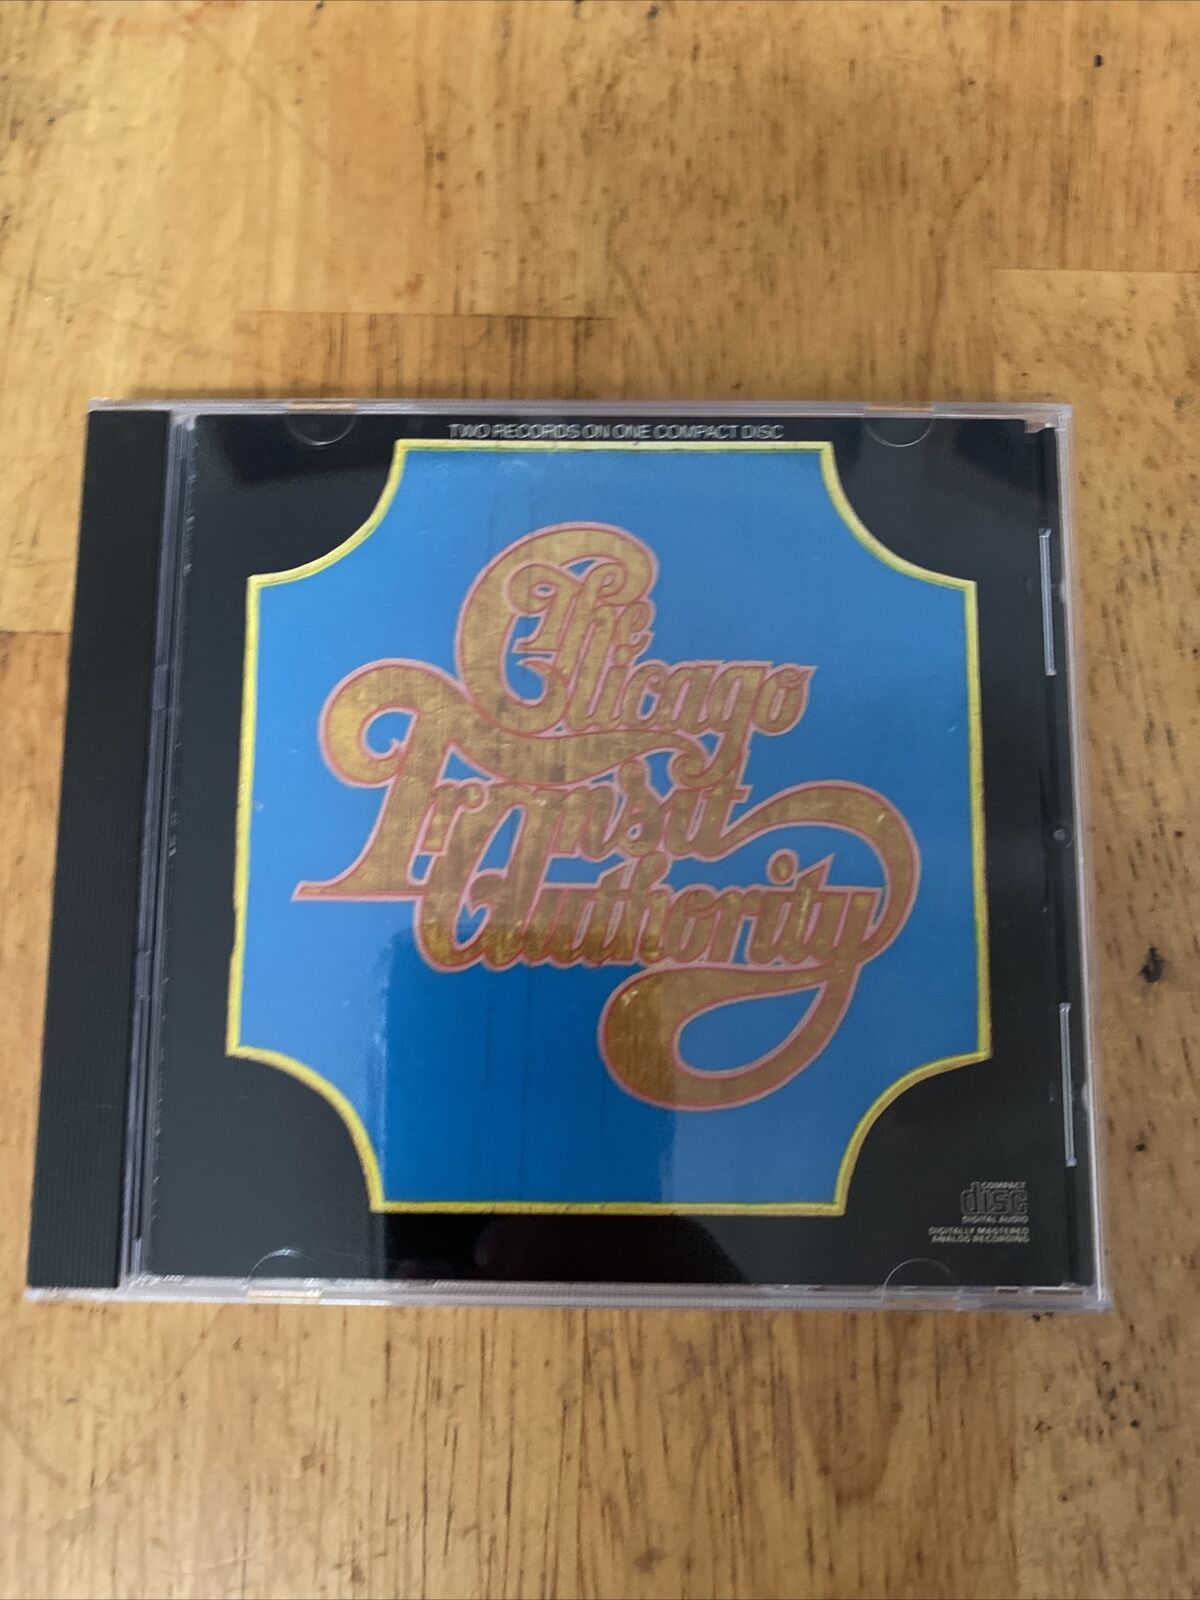 Chicago Chicago Transit Authority US CD Early Columbia Records Issue